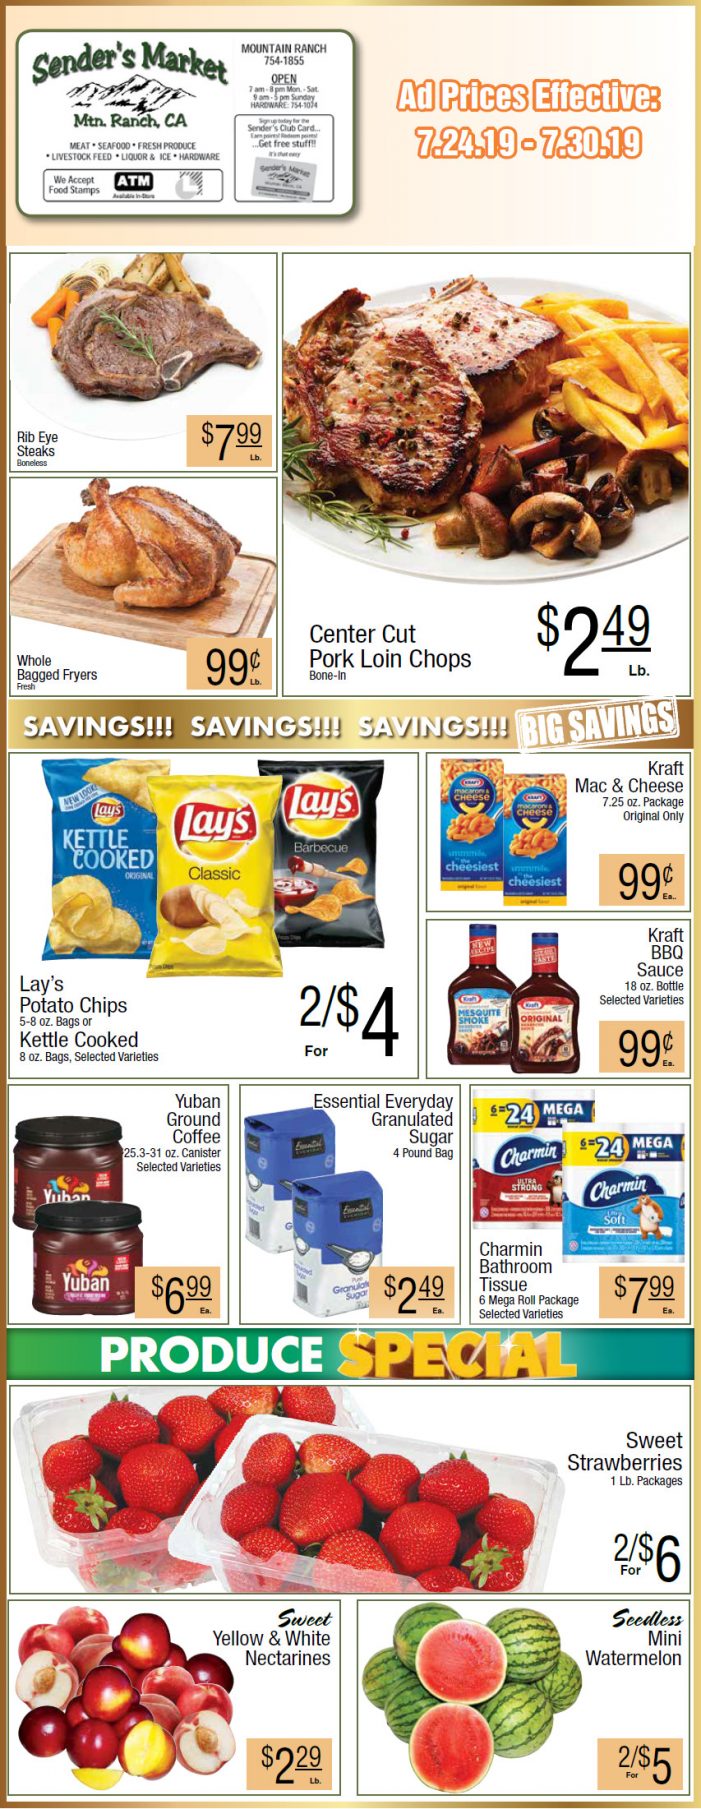 Sender’s Weekly Ad & Grocery Specials Through July 30th